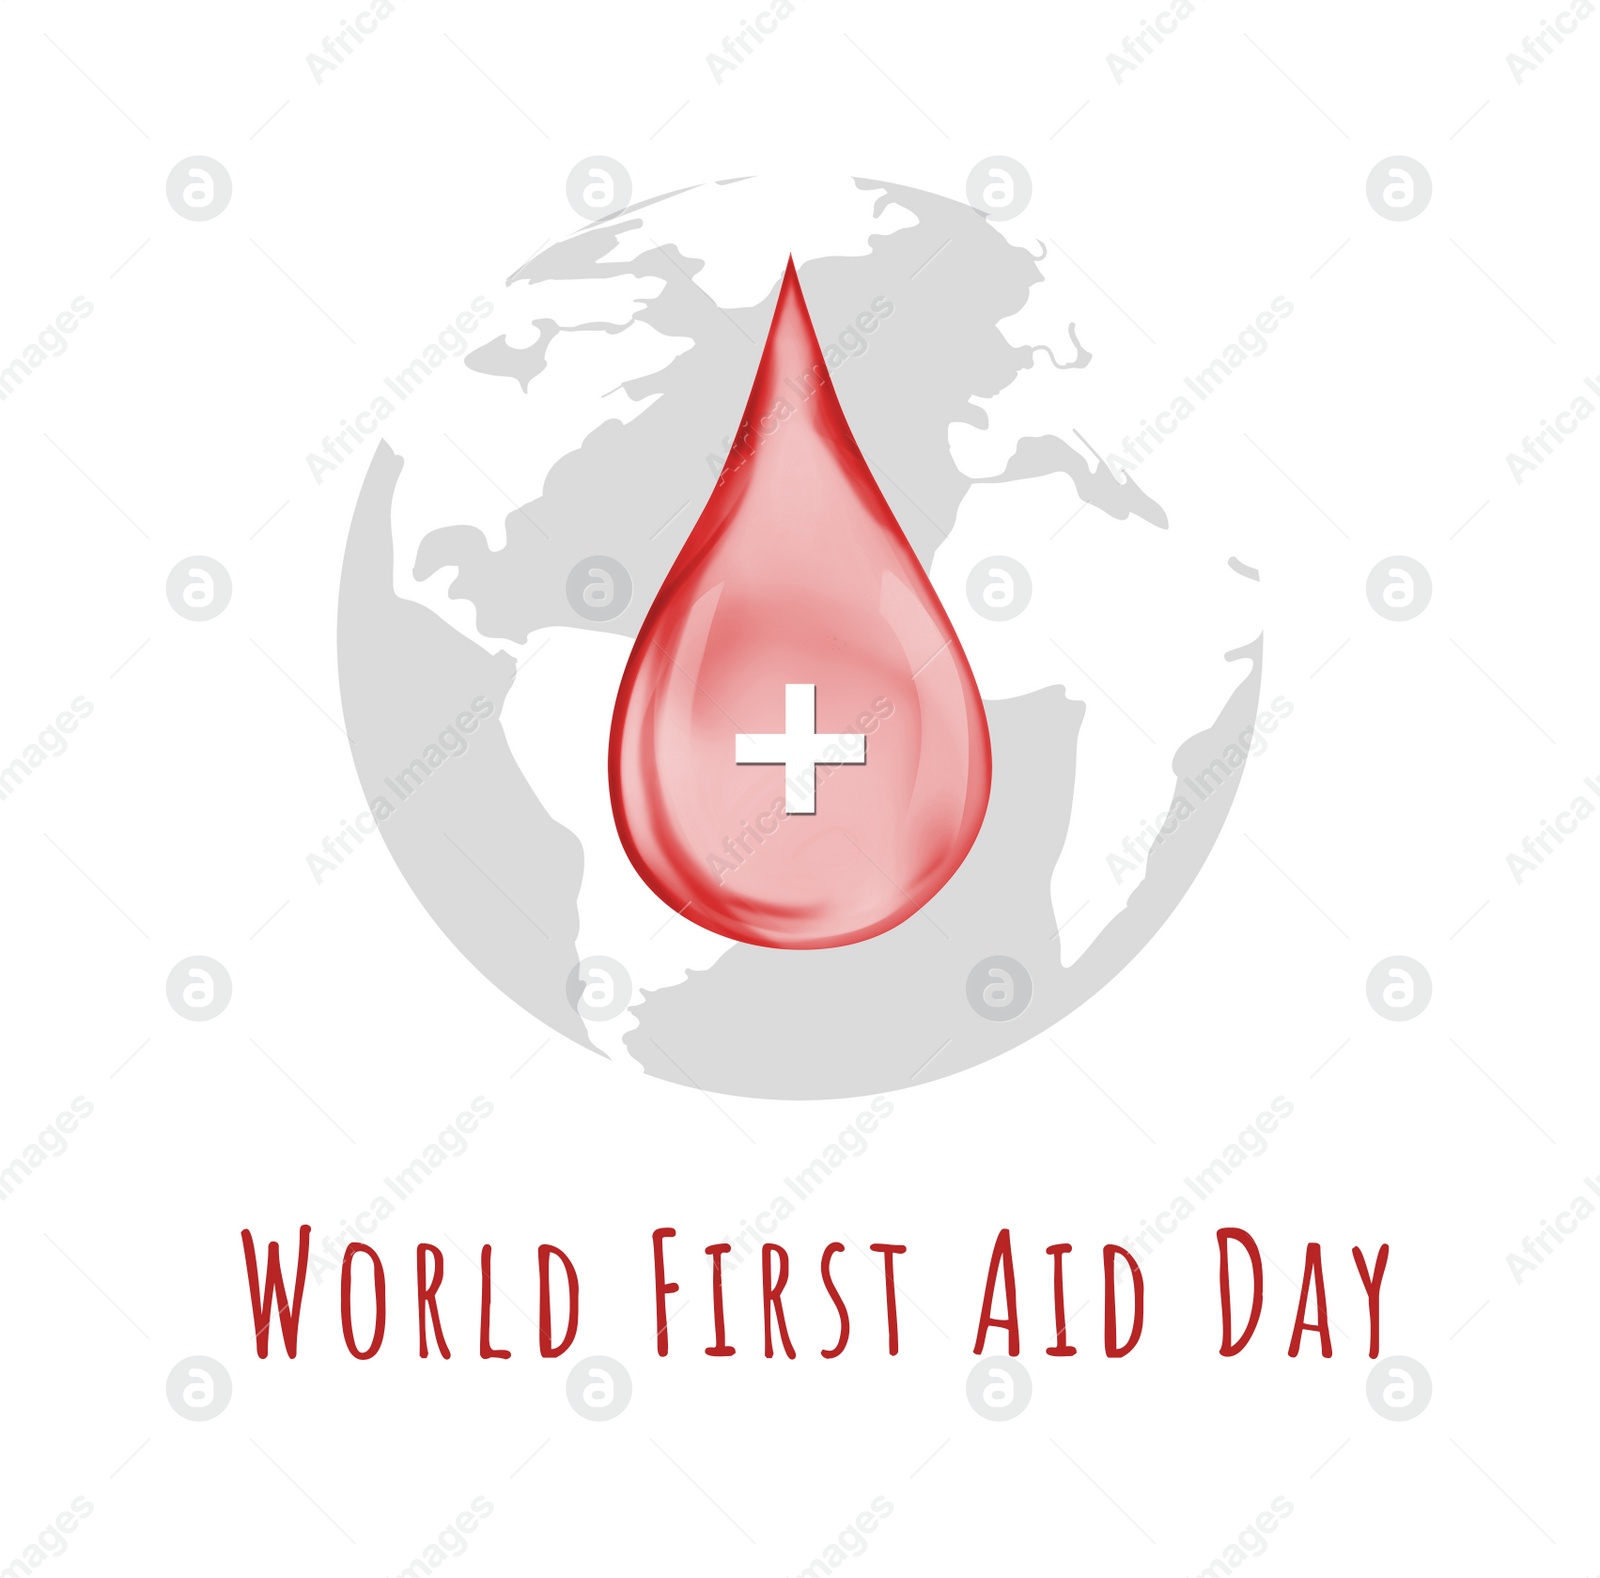 Illustration of World First Aid Day. Drop of blood with cross symbol and Earth on white background, illustration 